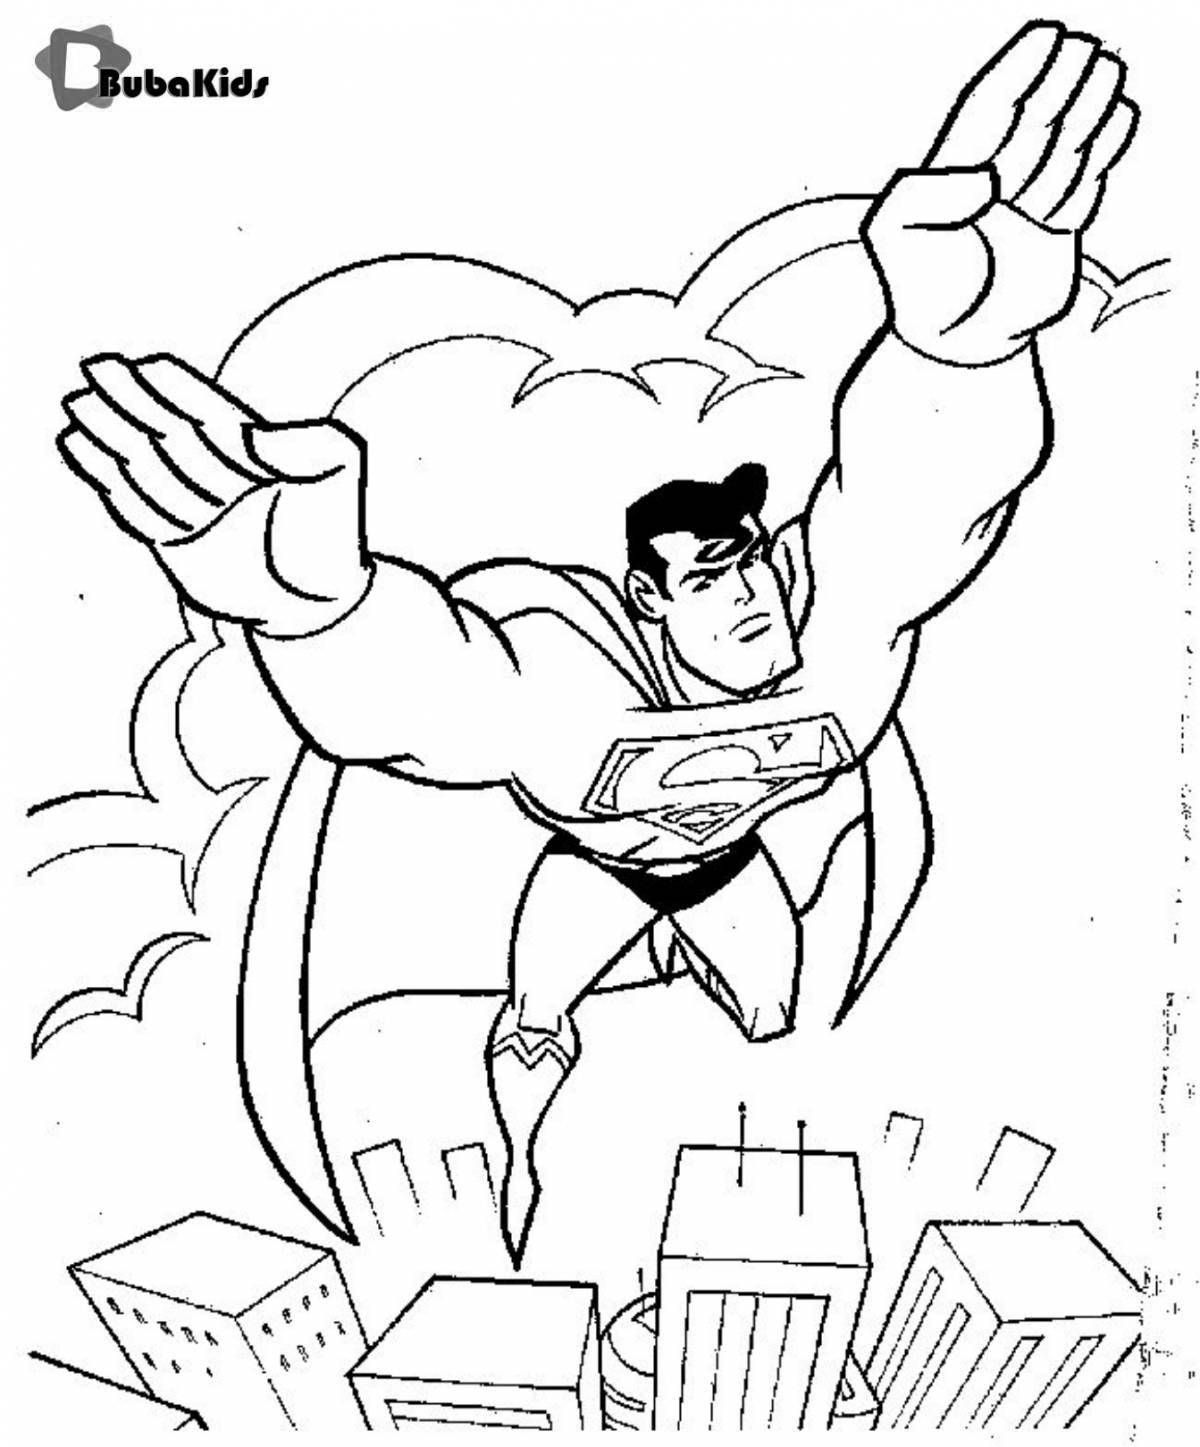 Witty superman coloring book for 3-4 year olds